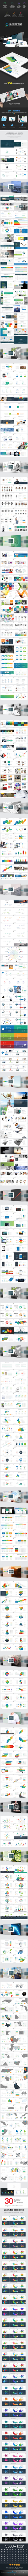 Real Topic Clean Multipurpose PowerPoint Template